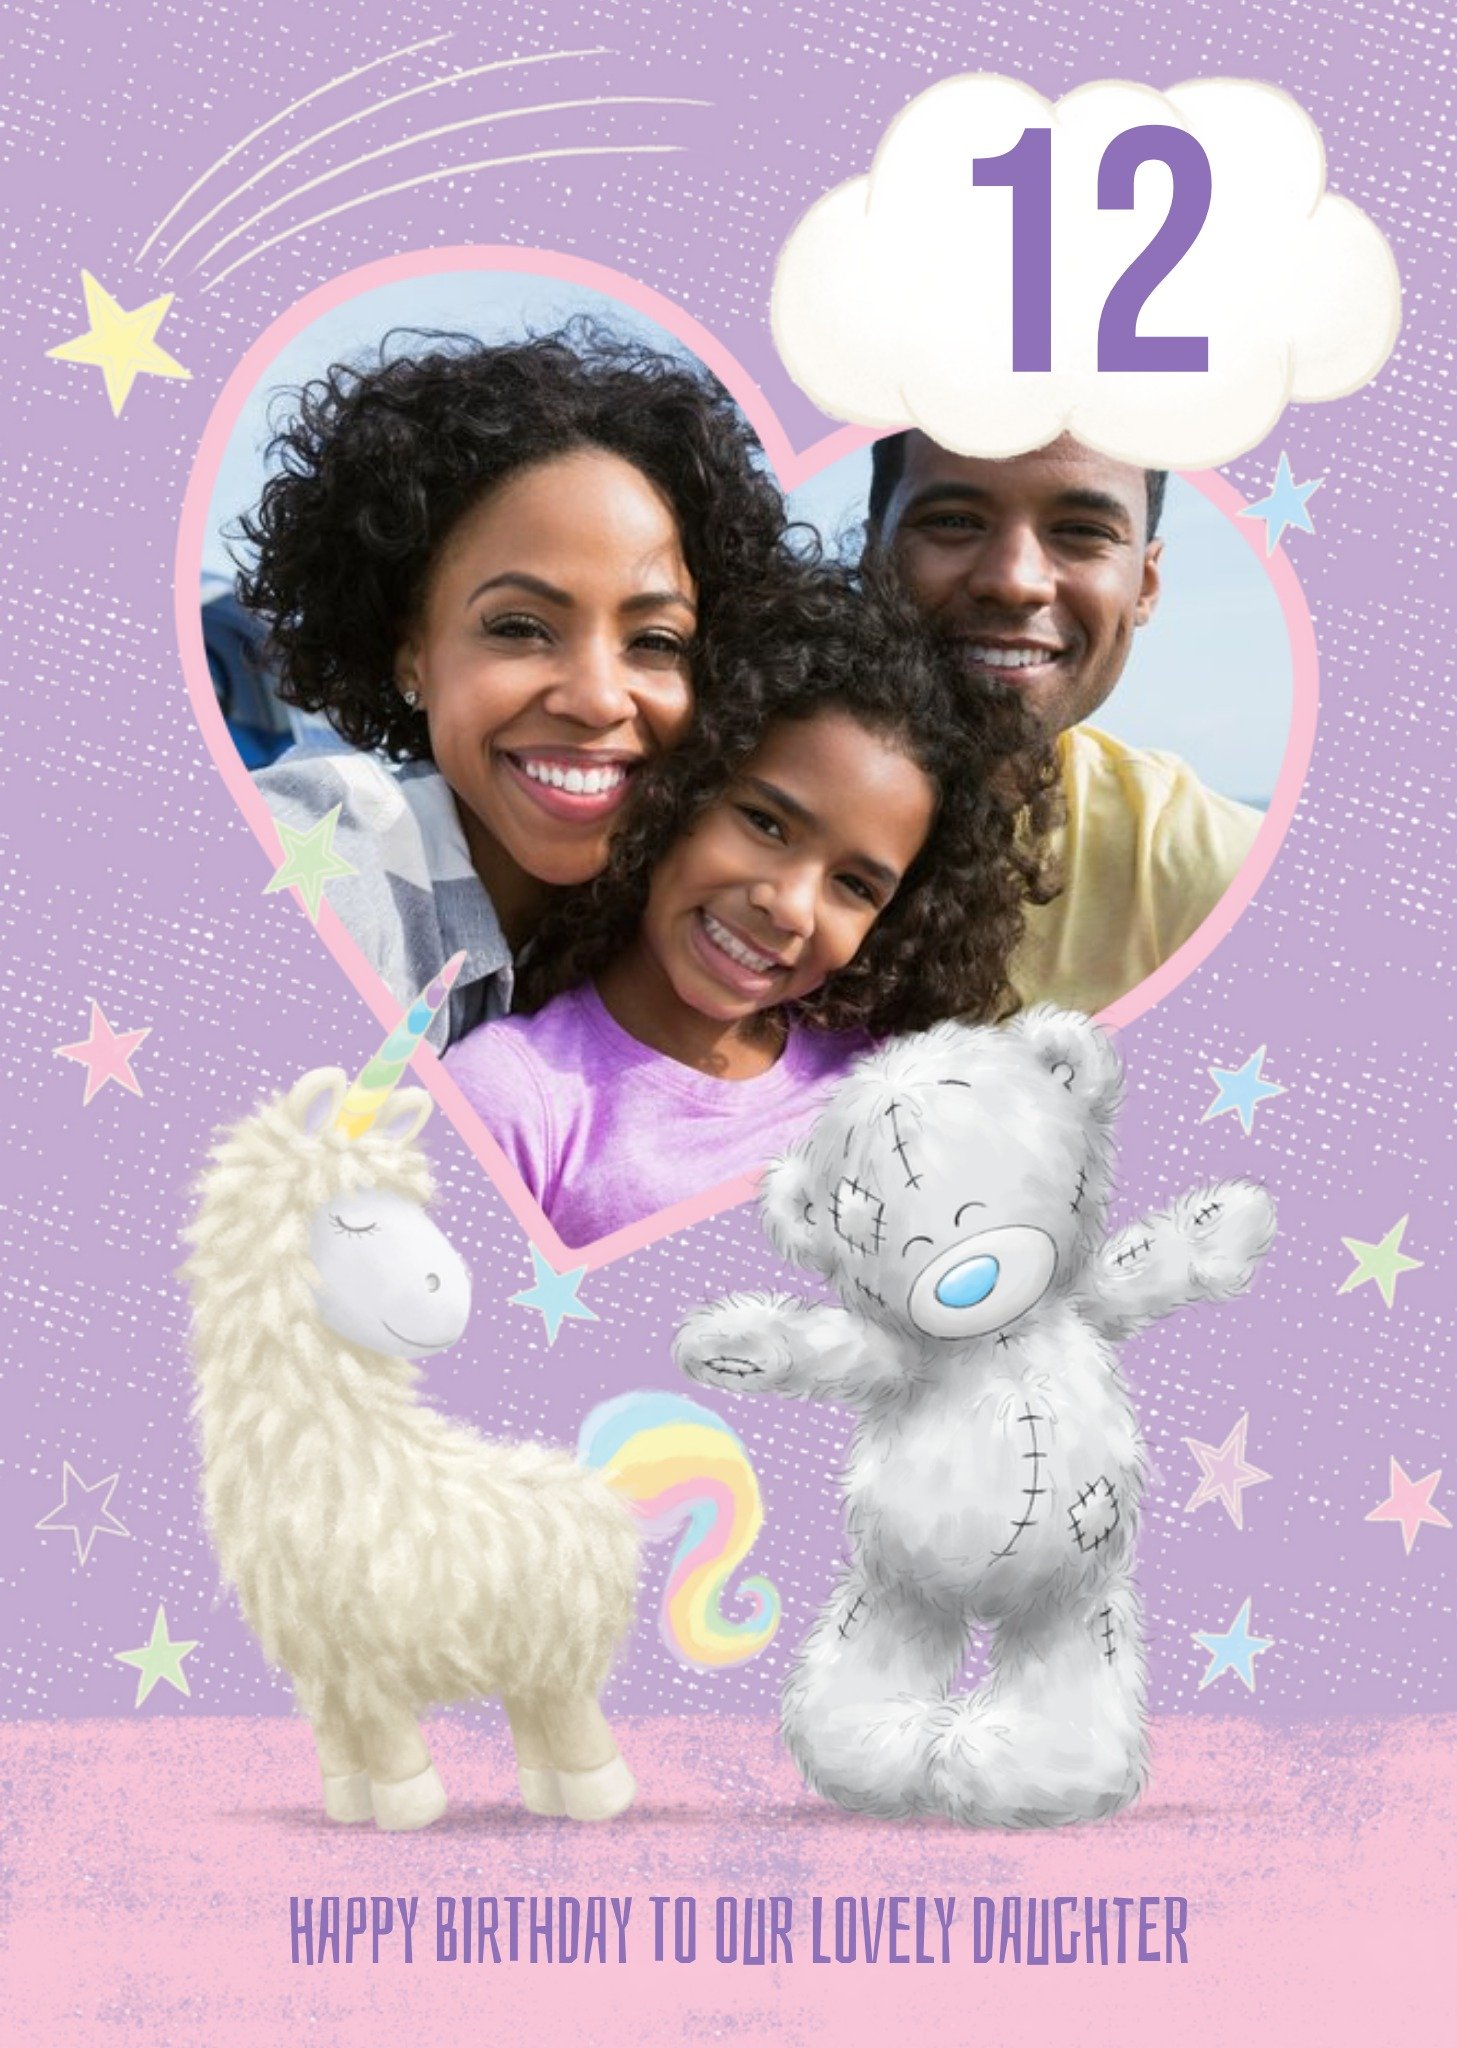 Me To You Cute Tatty Teddy Birthday Card - Daughter - Photo Upload, Large